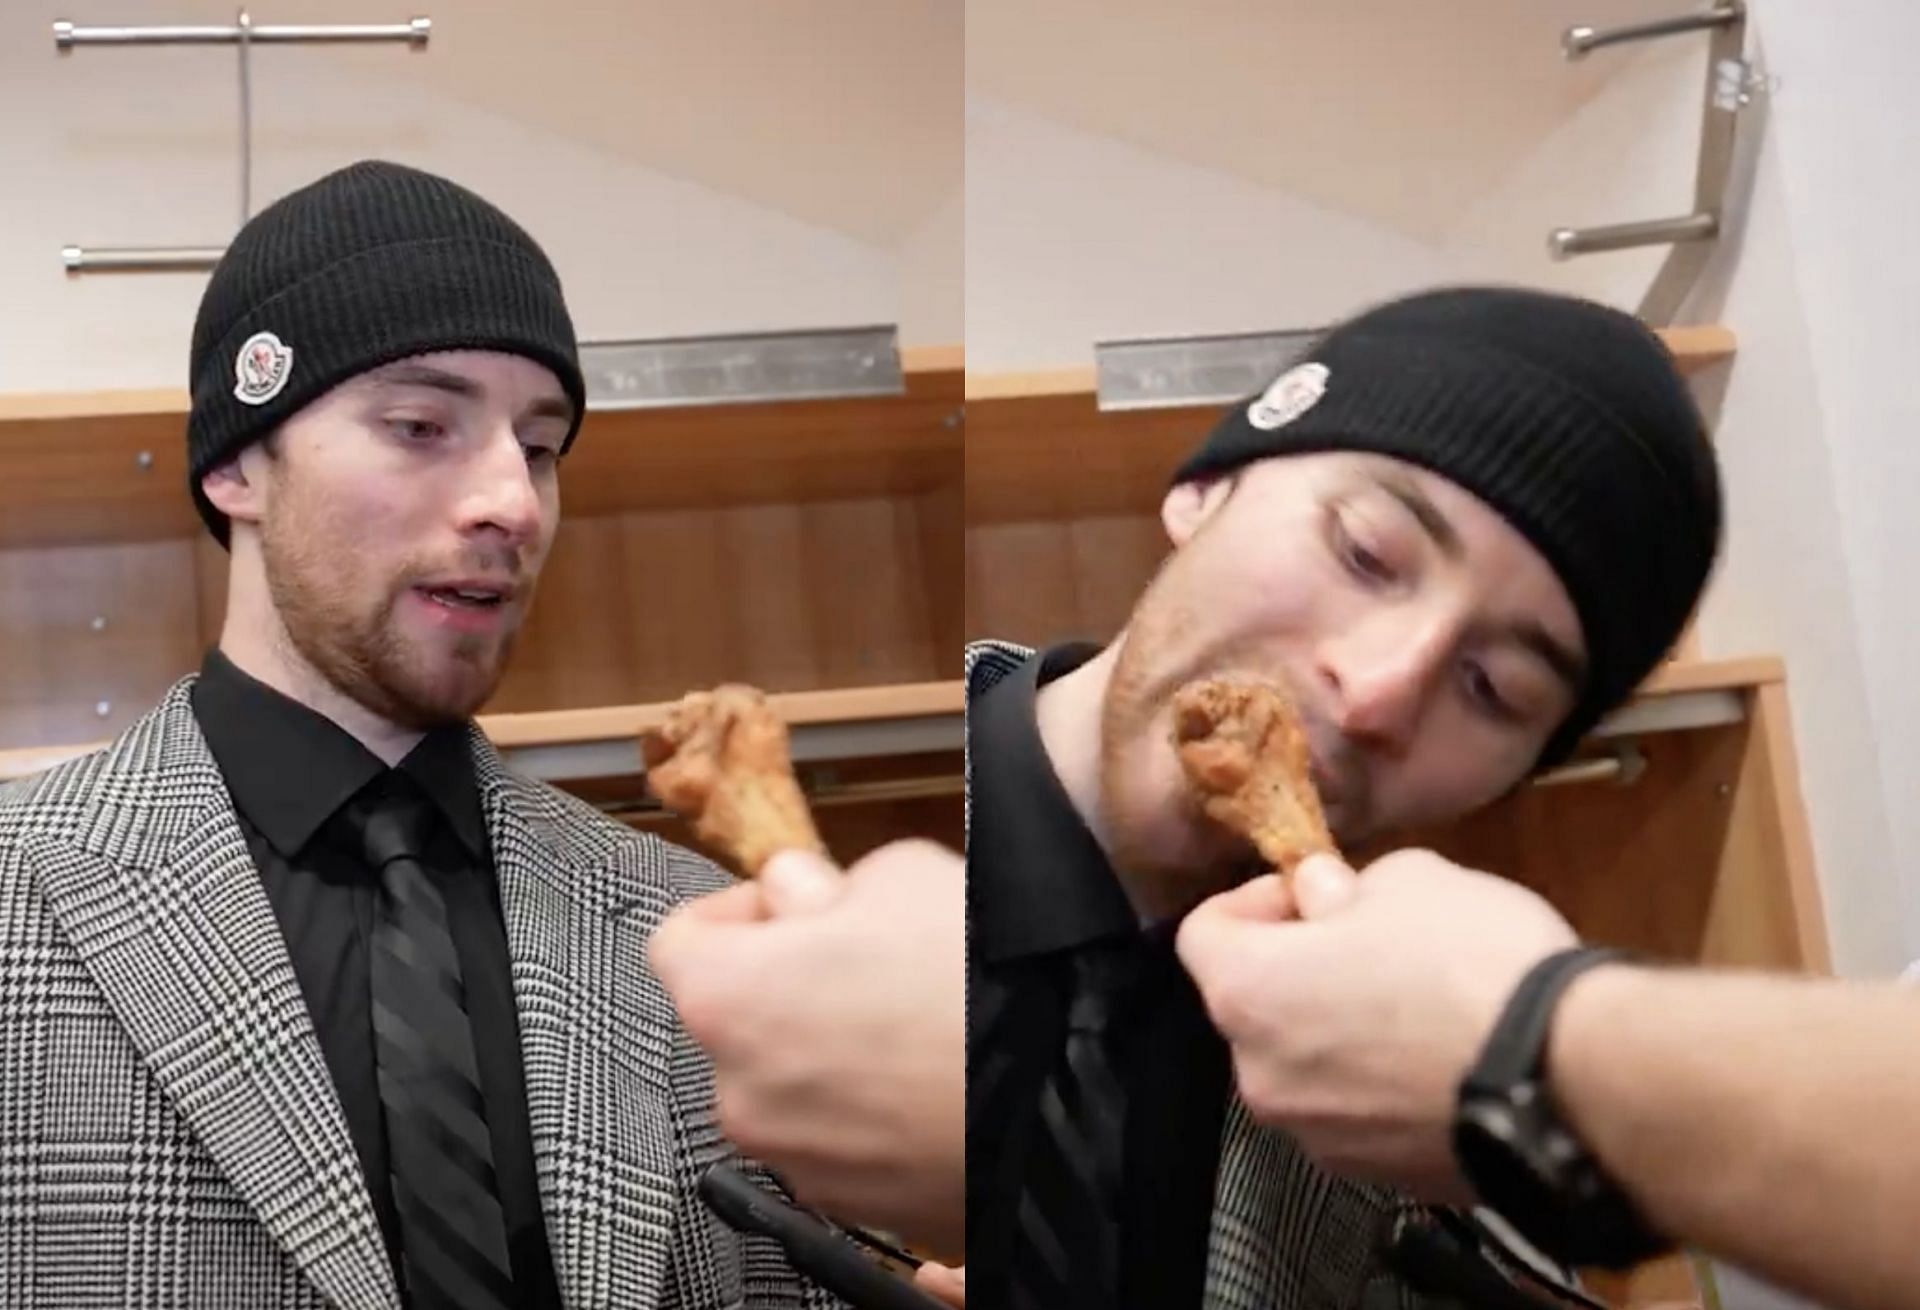 Bruins goalie Jeremy Swayman celebrates win over Sabres by hilariously digging into chicken wings midway through interview